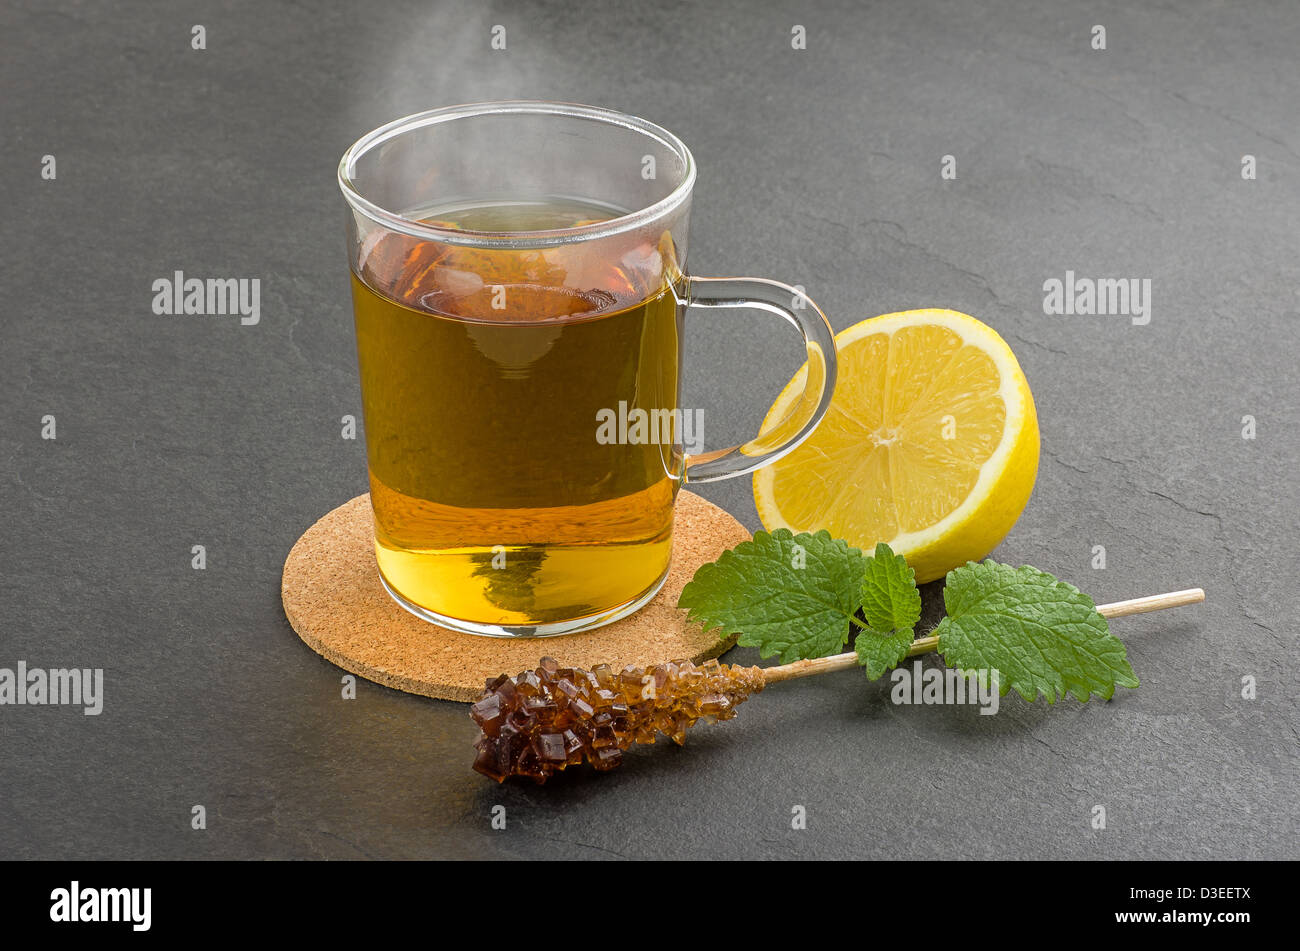 Steaming cup of tea on a slate plate Stock Photo